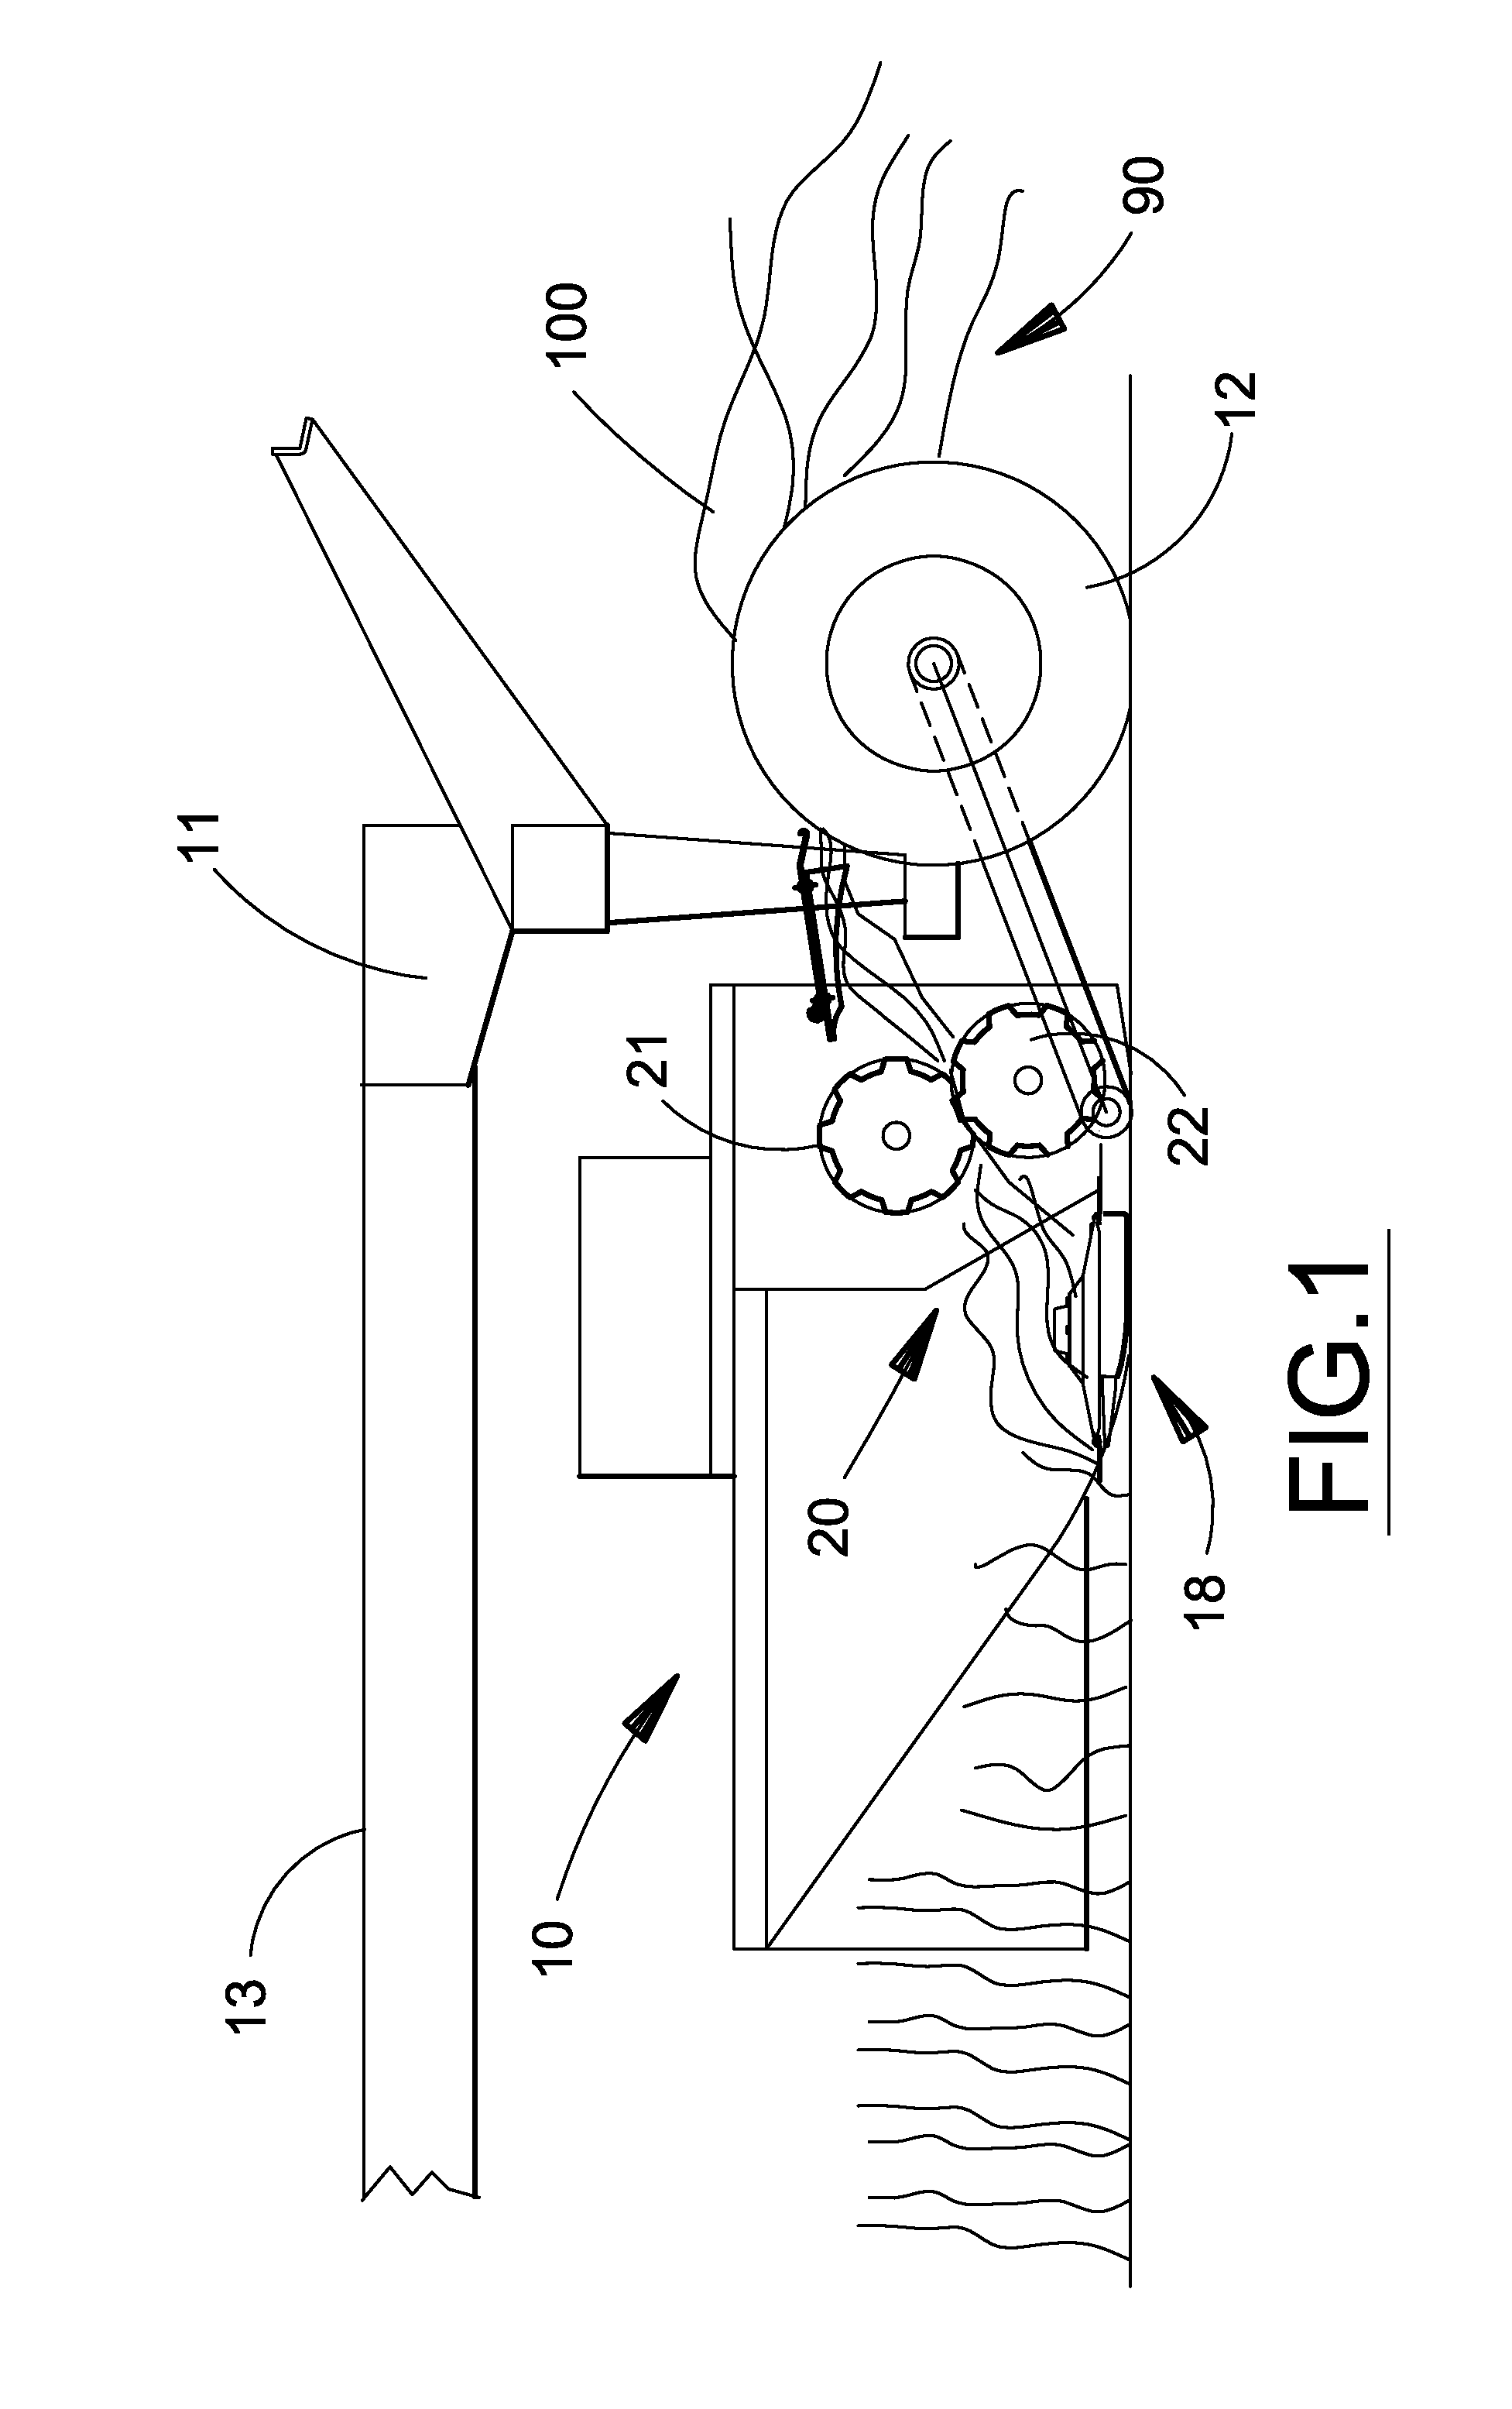 Swathgate with adjustable crop guides and method of crop distribution